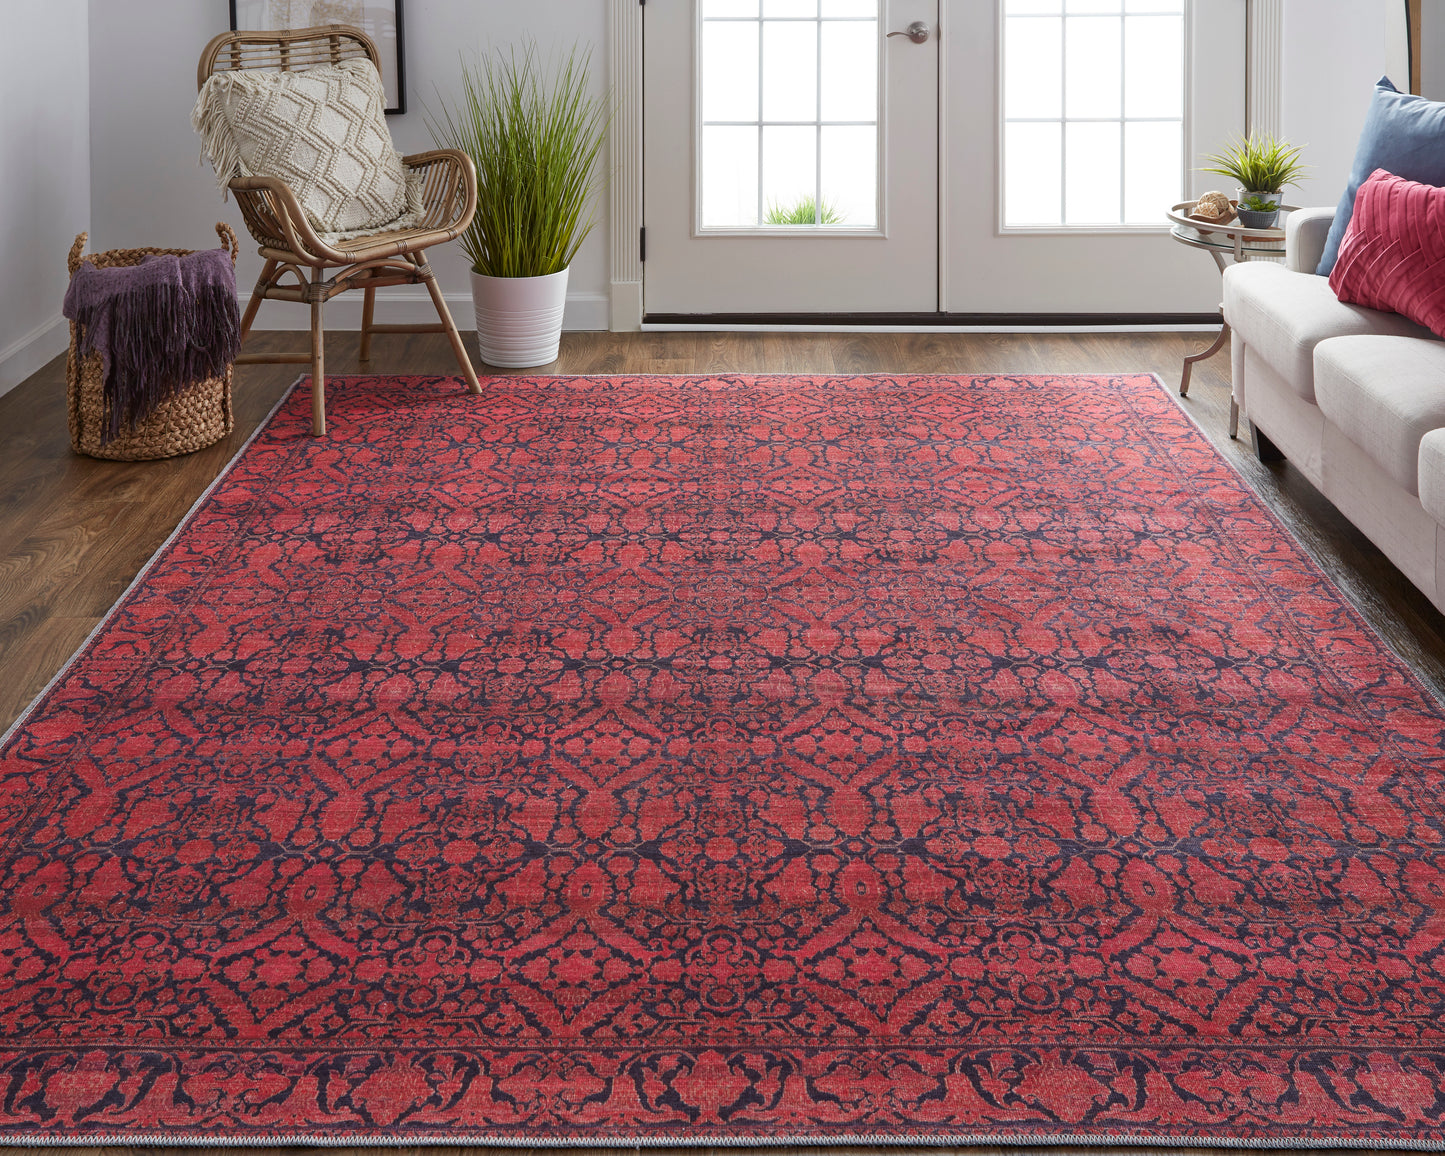 Voss 39H6F Power Loomed Synthetic Blend Indoor Area Rug by Feizy Rugs